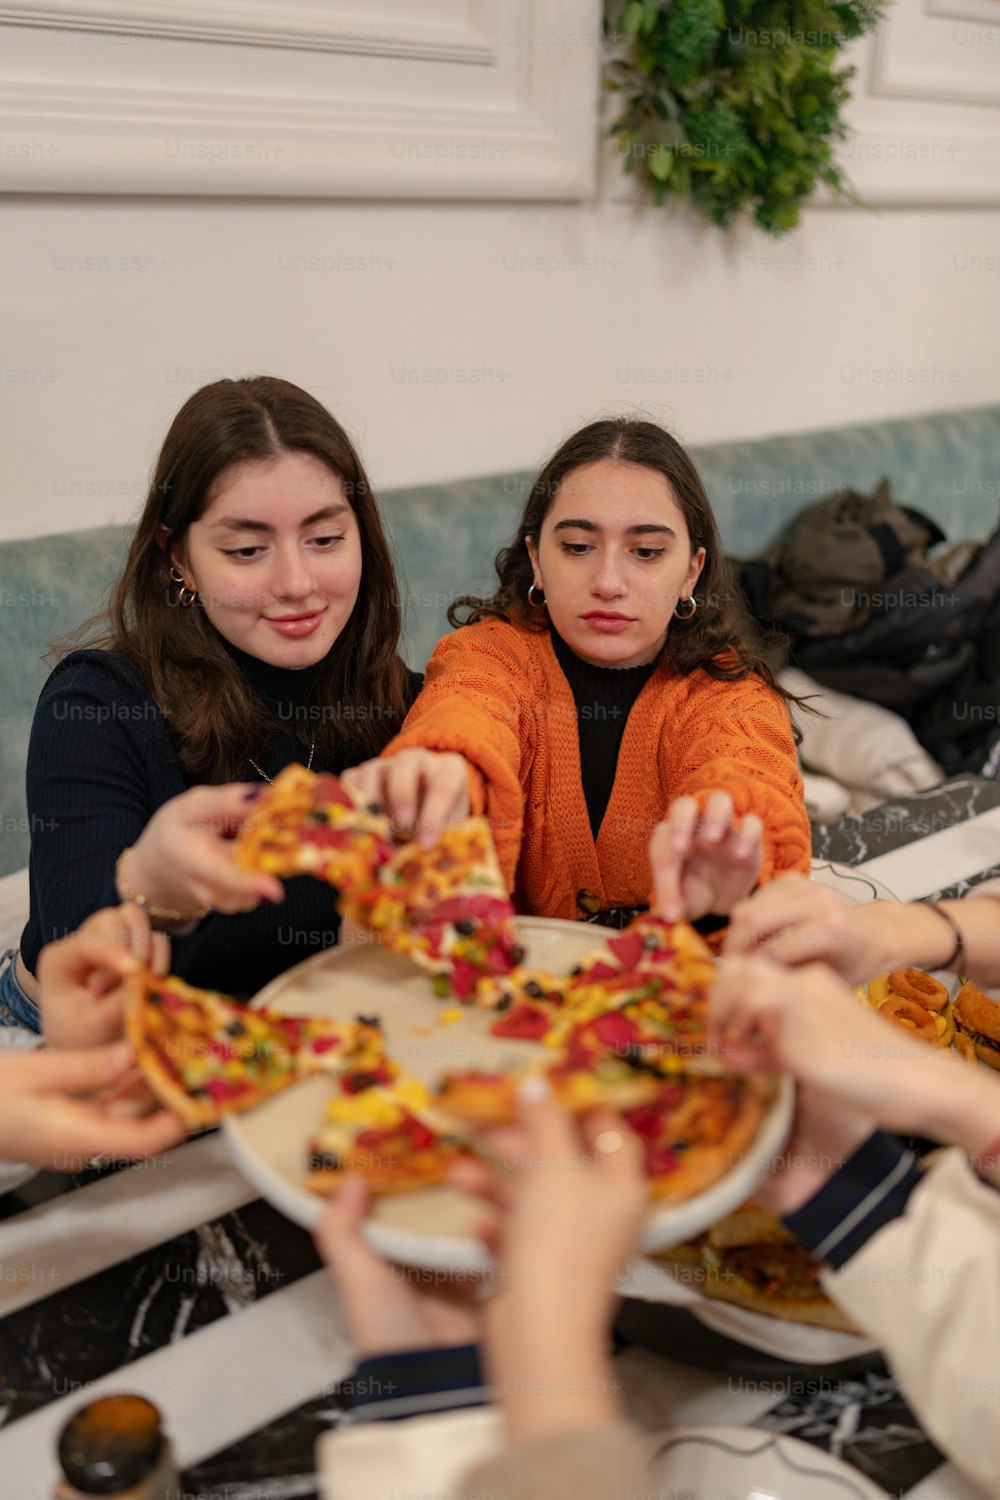 a group of women sitting around a table eating pizza